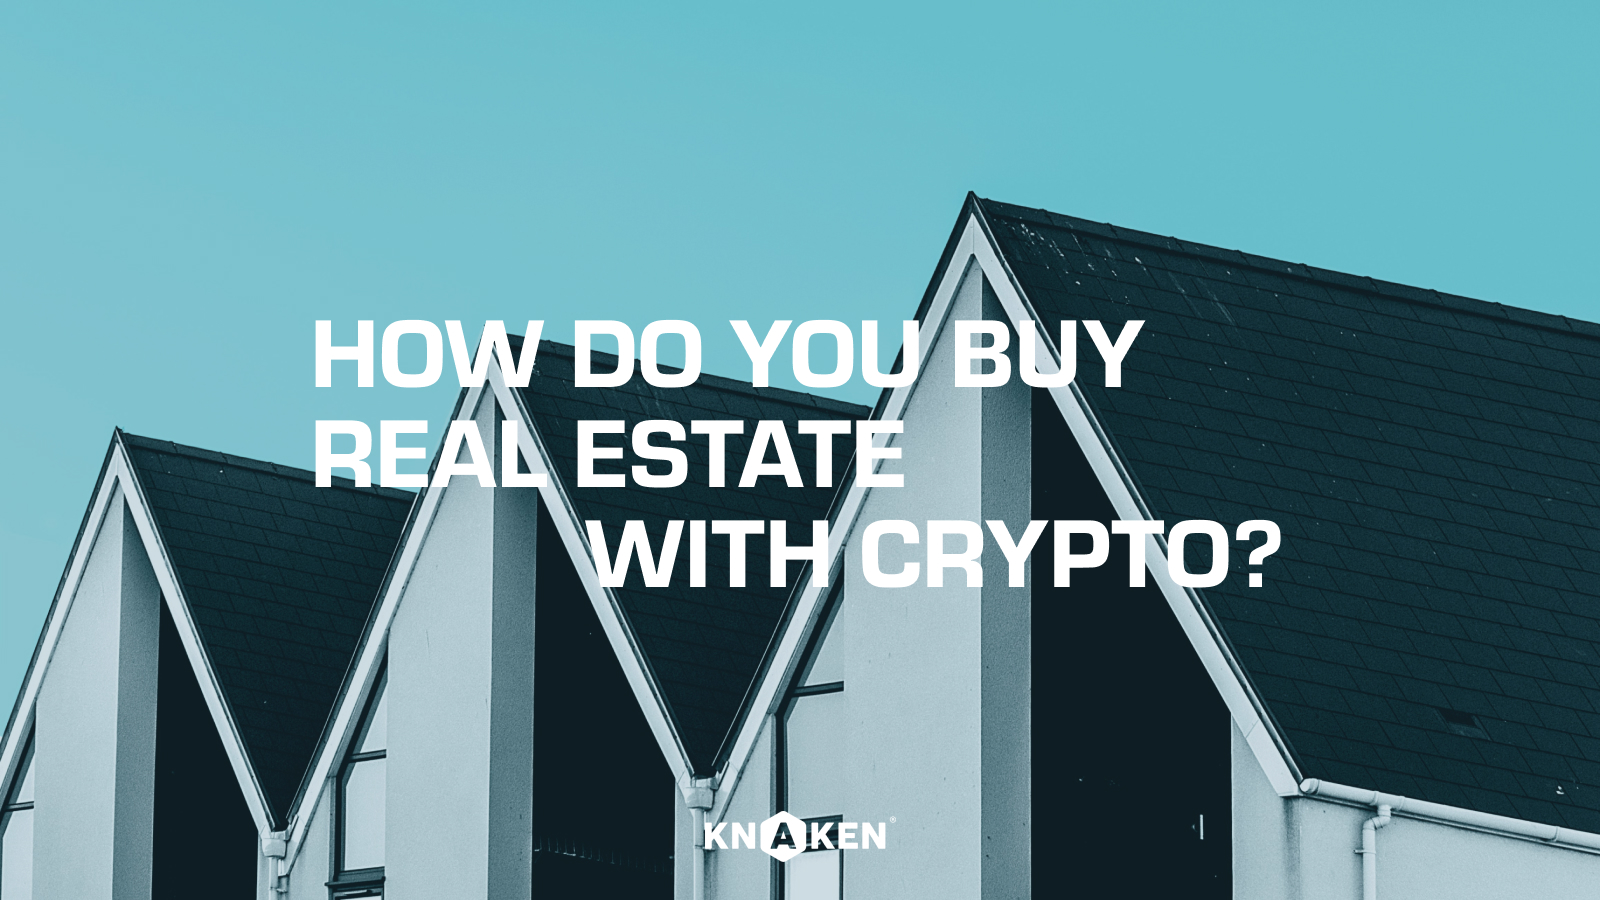 How do you buy real estate with cryptocurrency?